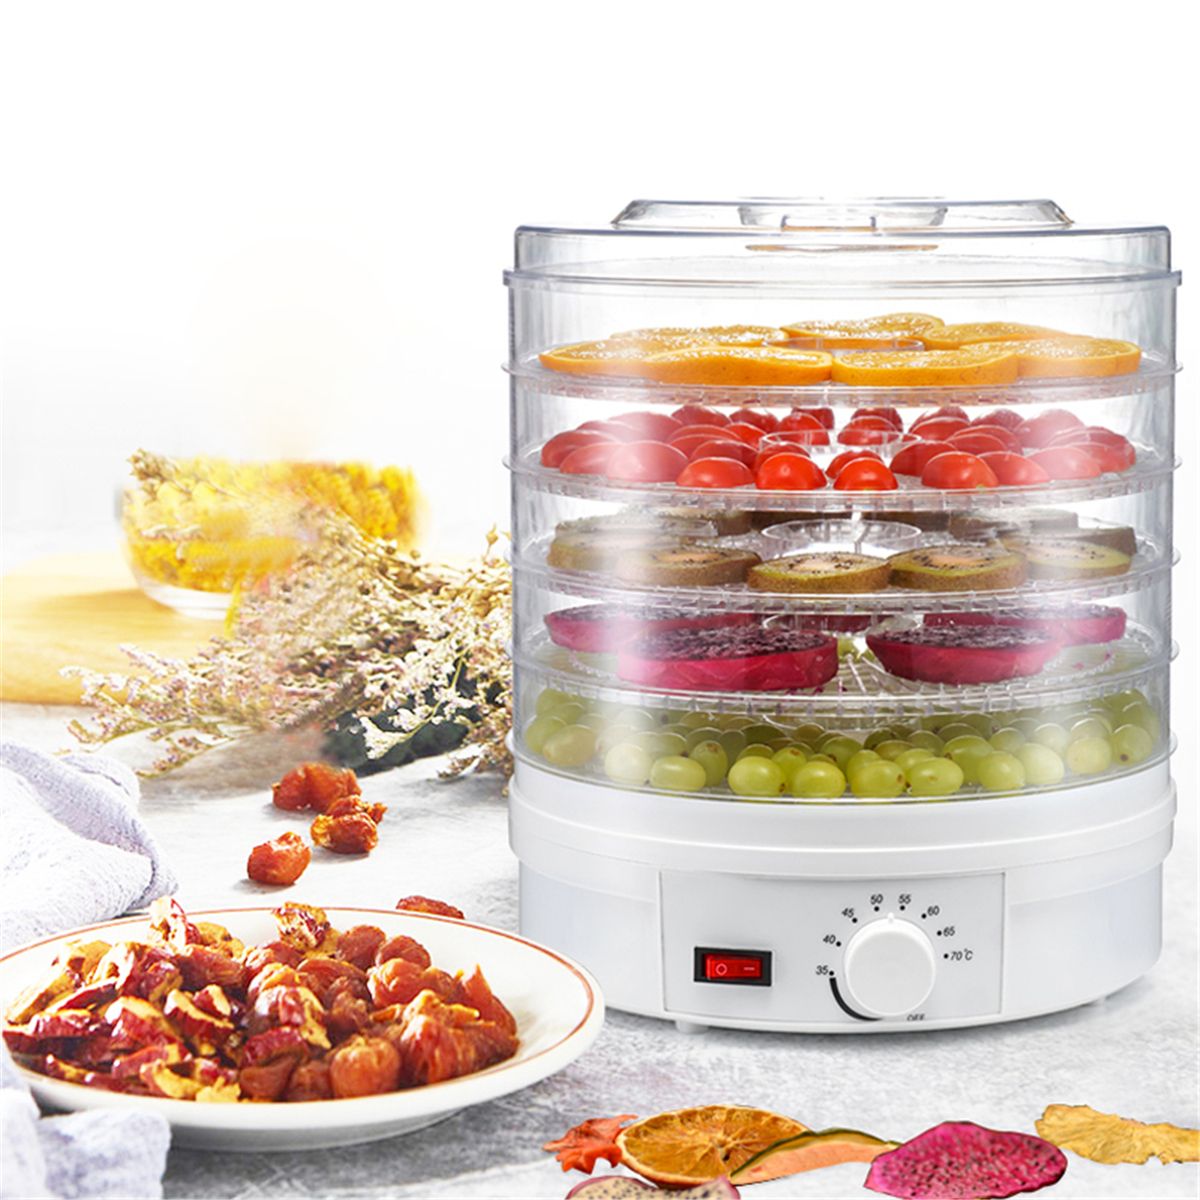 110V-350W-5-Trays-Food-Vegetable-Dehydrator-Fruit-Meat-Dryer-Drying-Machine-1568505